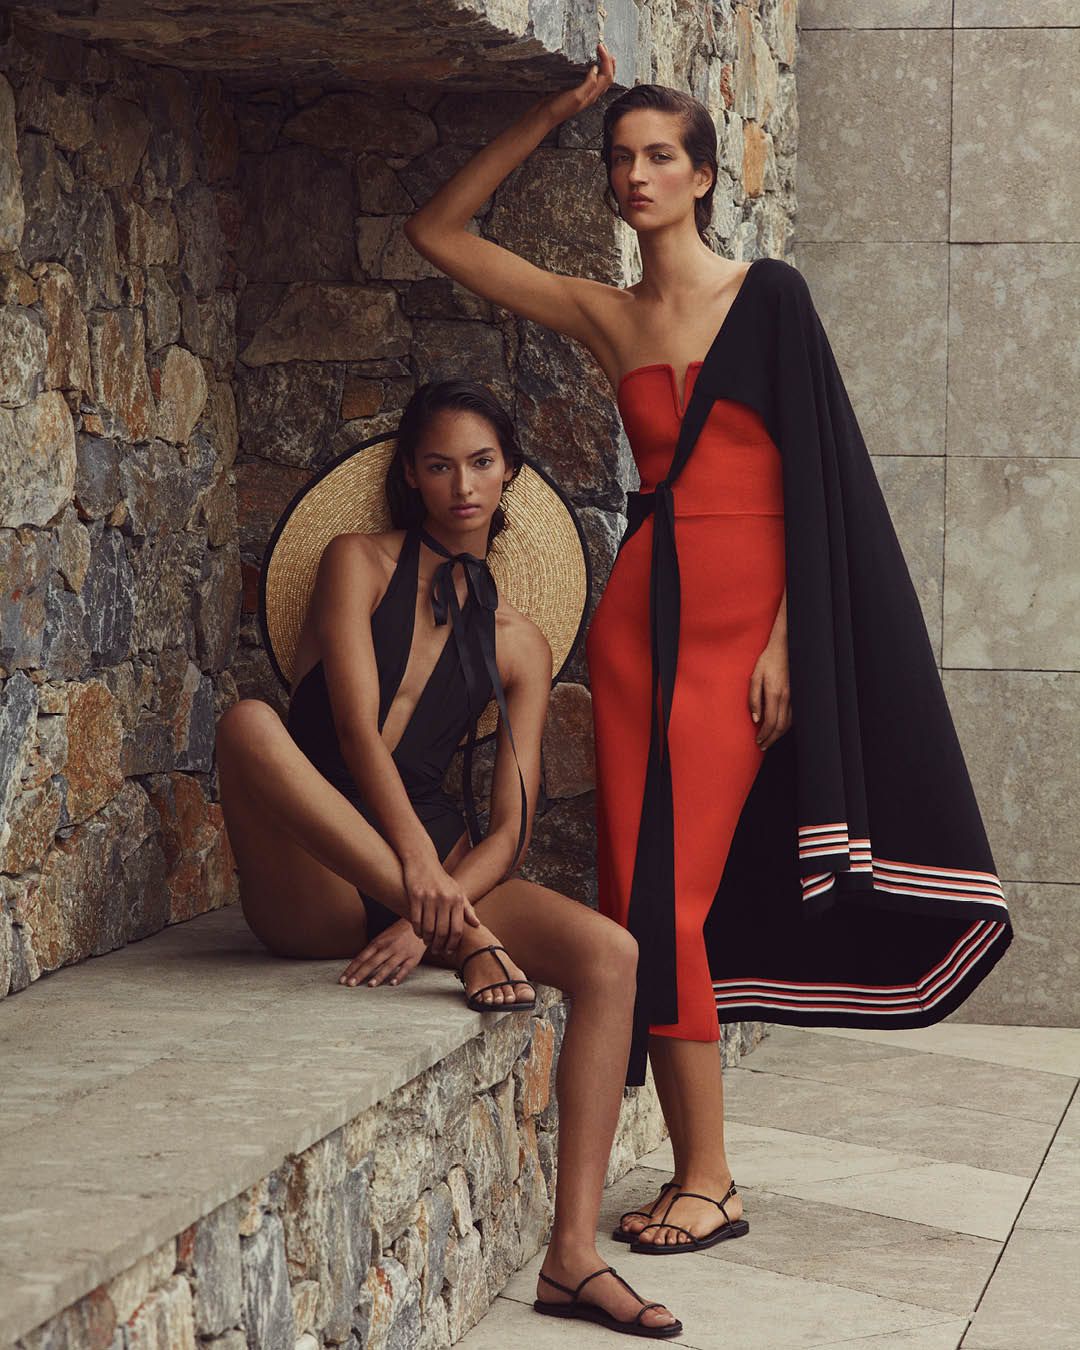 Two models posing - left model wearing a black one-piece swimsuit, right model wearing a red strapless dress